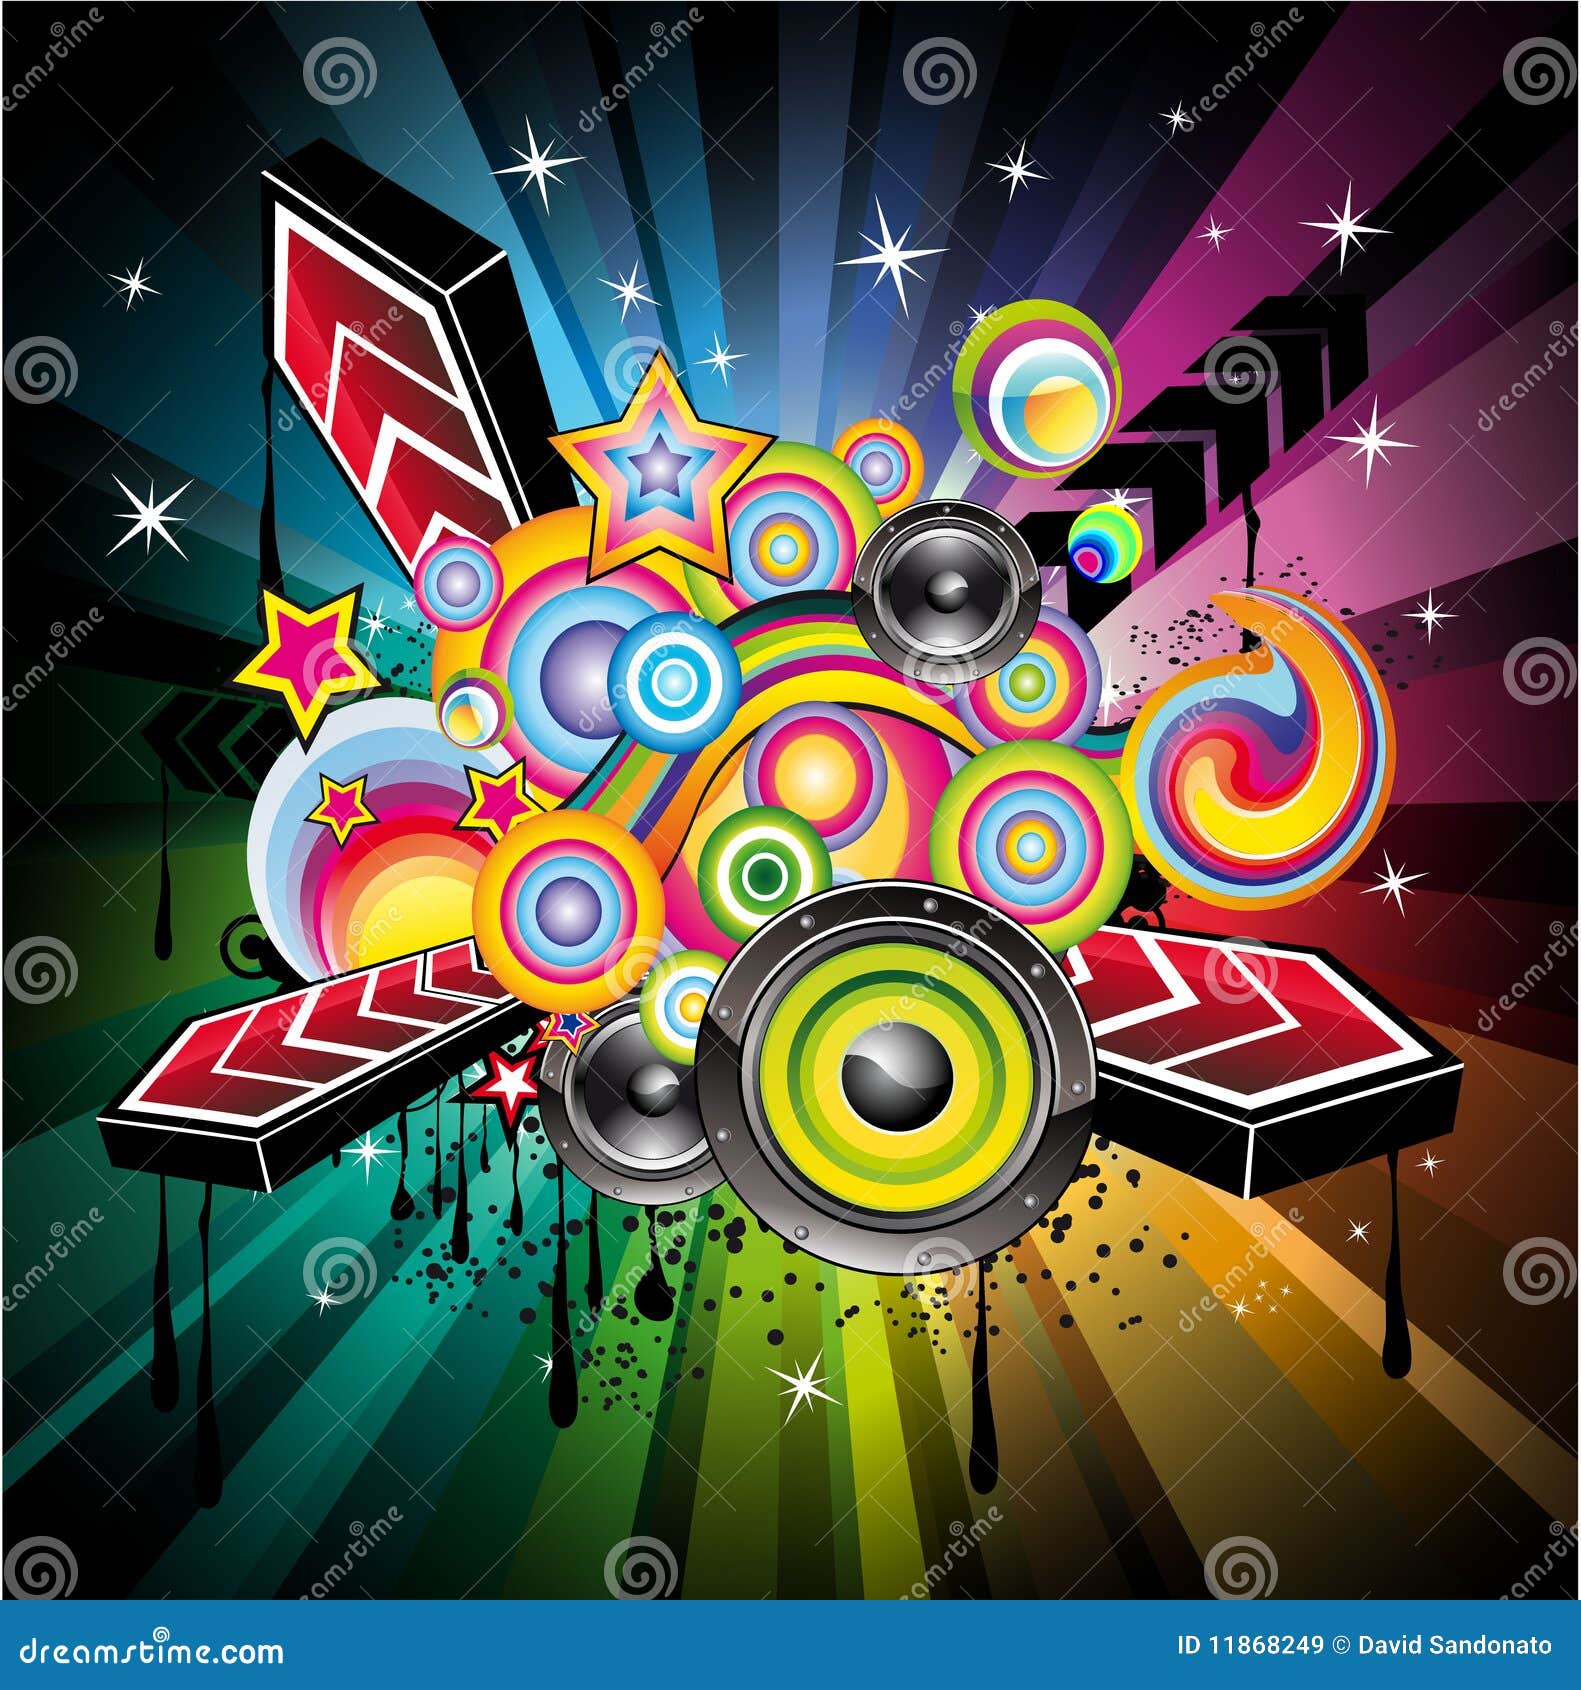 Disco Music Background stock vector. Illustration of background - 11868249